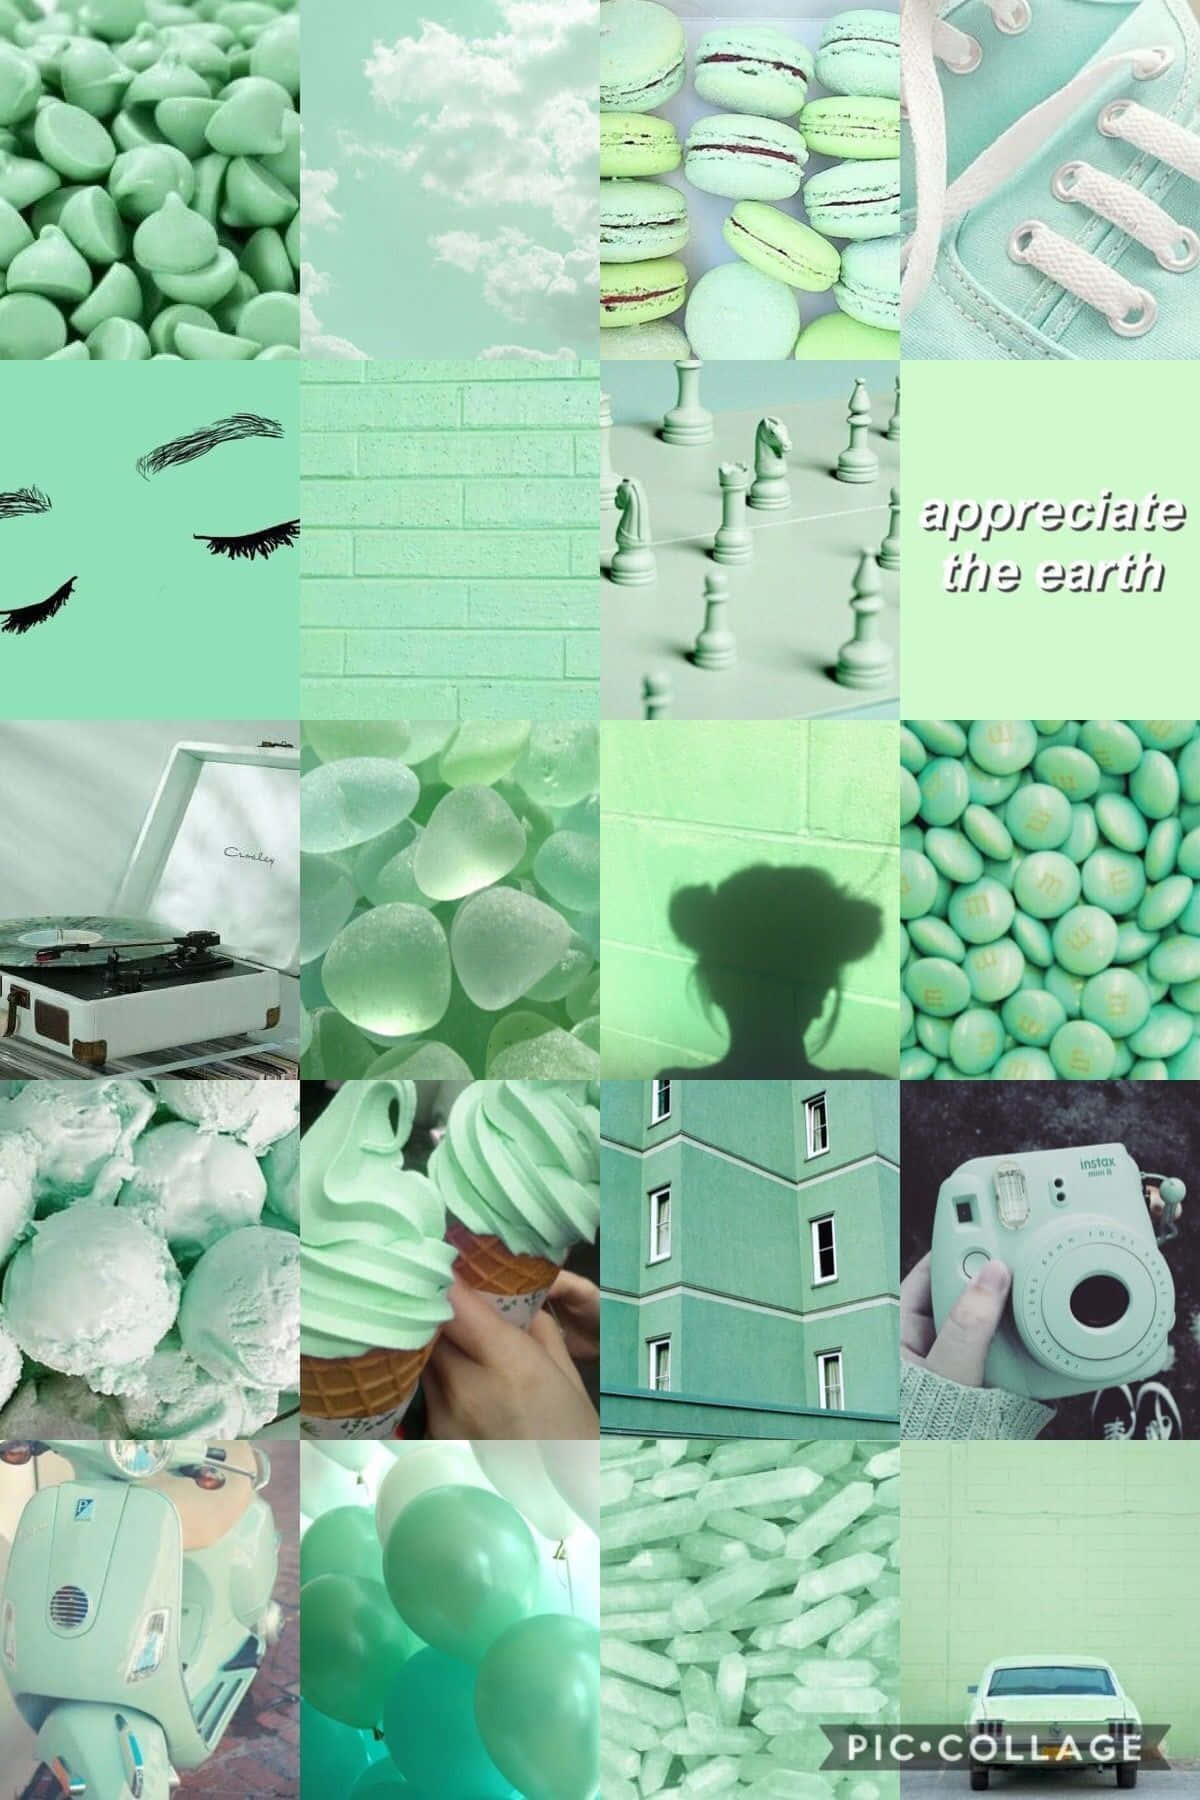 A Collage Of Pictures Of Green And White